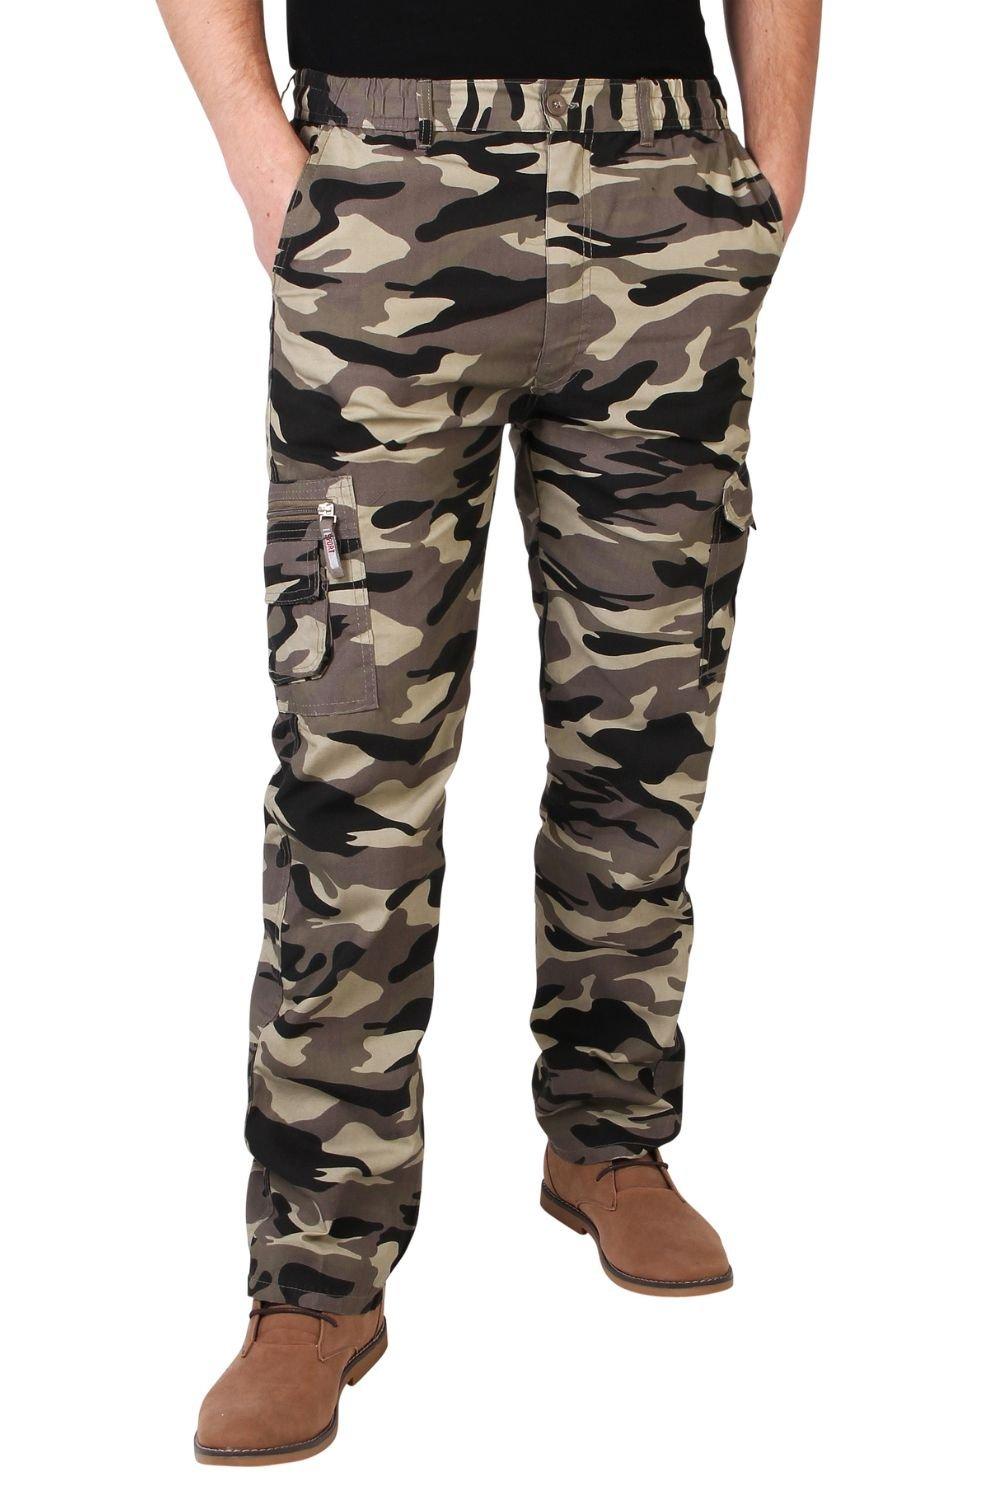 KRISP Mens Army Cargo Combat Military Short Trousers Pants : :  Clothing, Shoes & Accessories